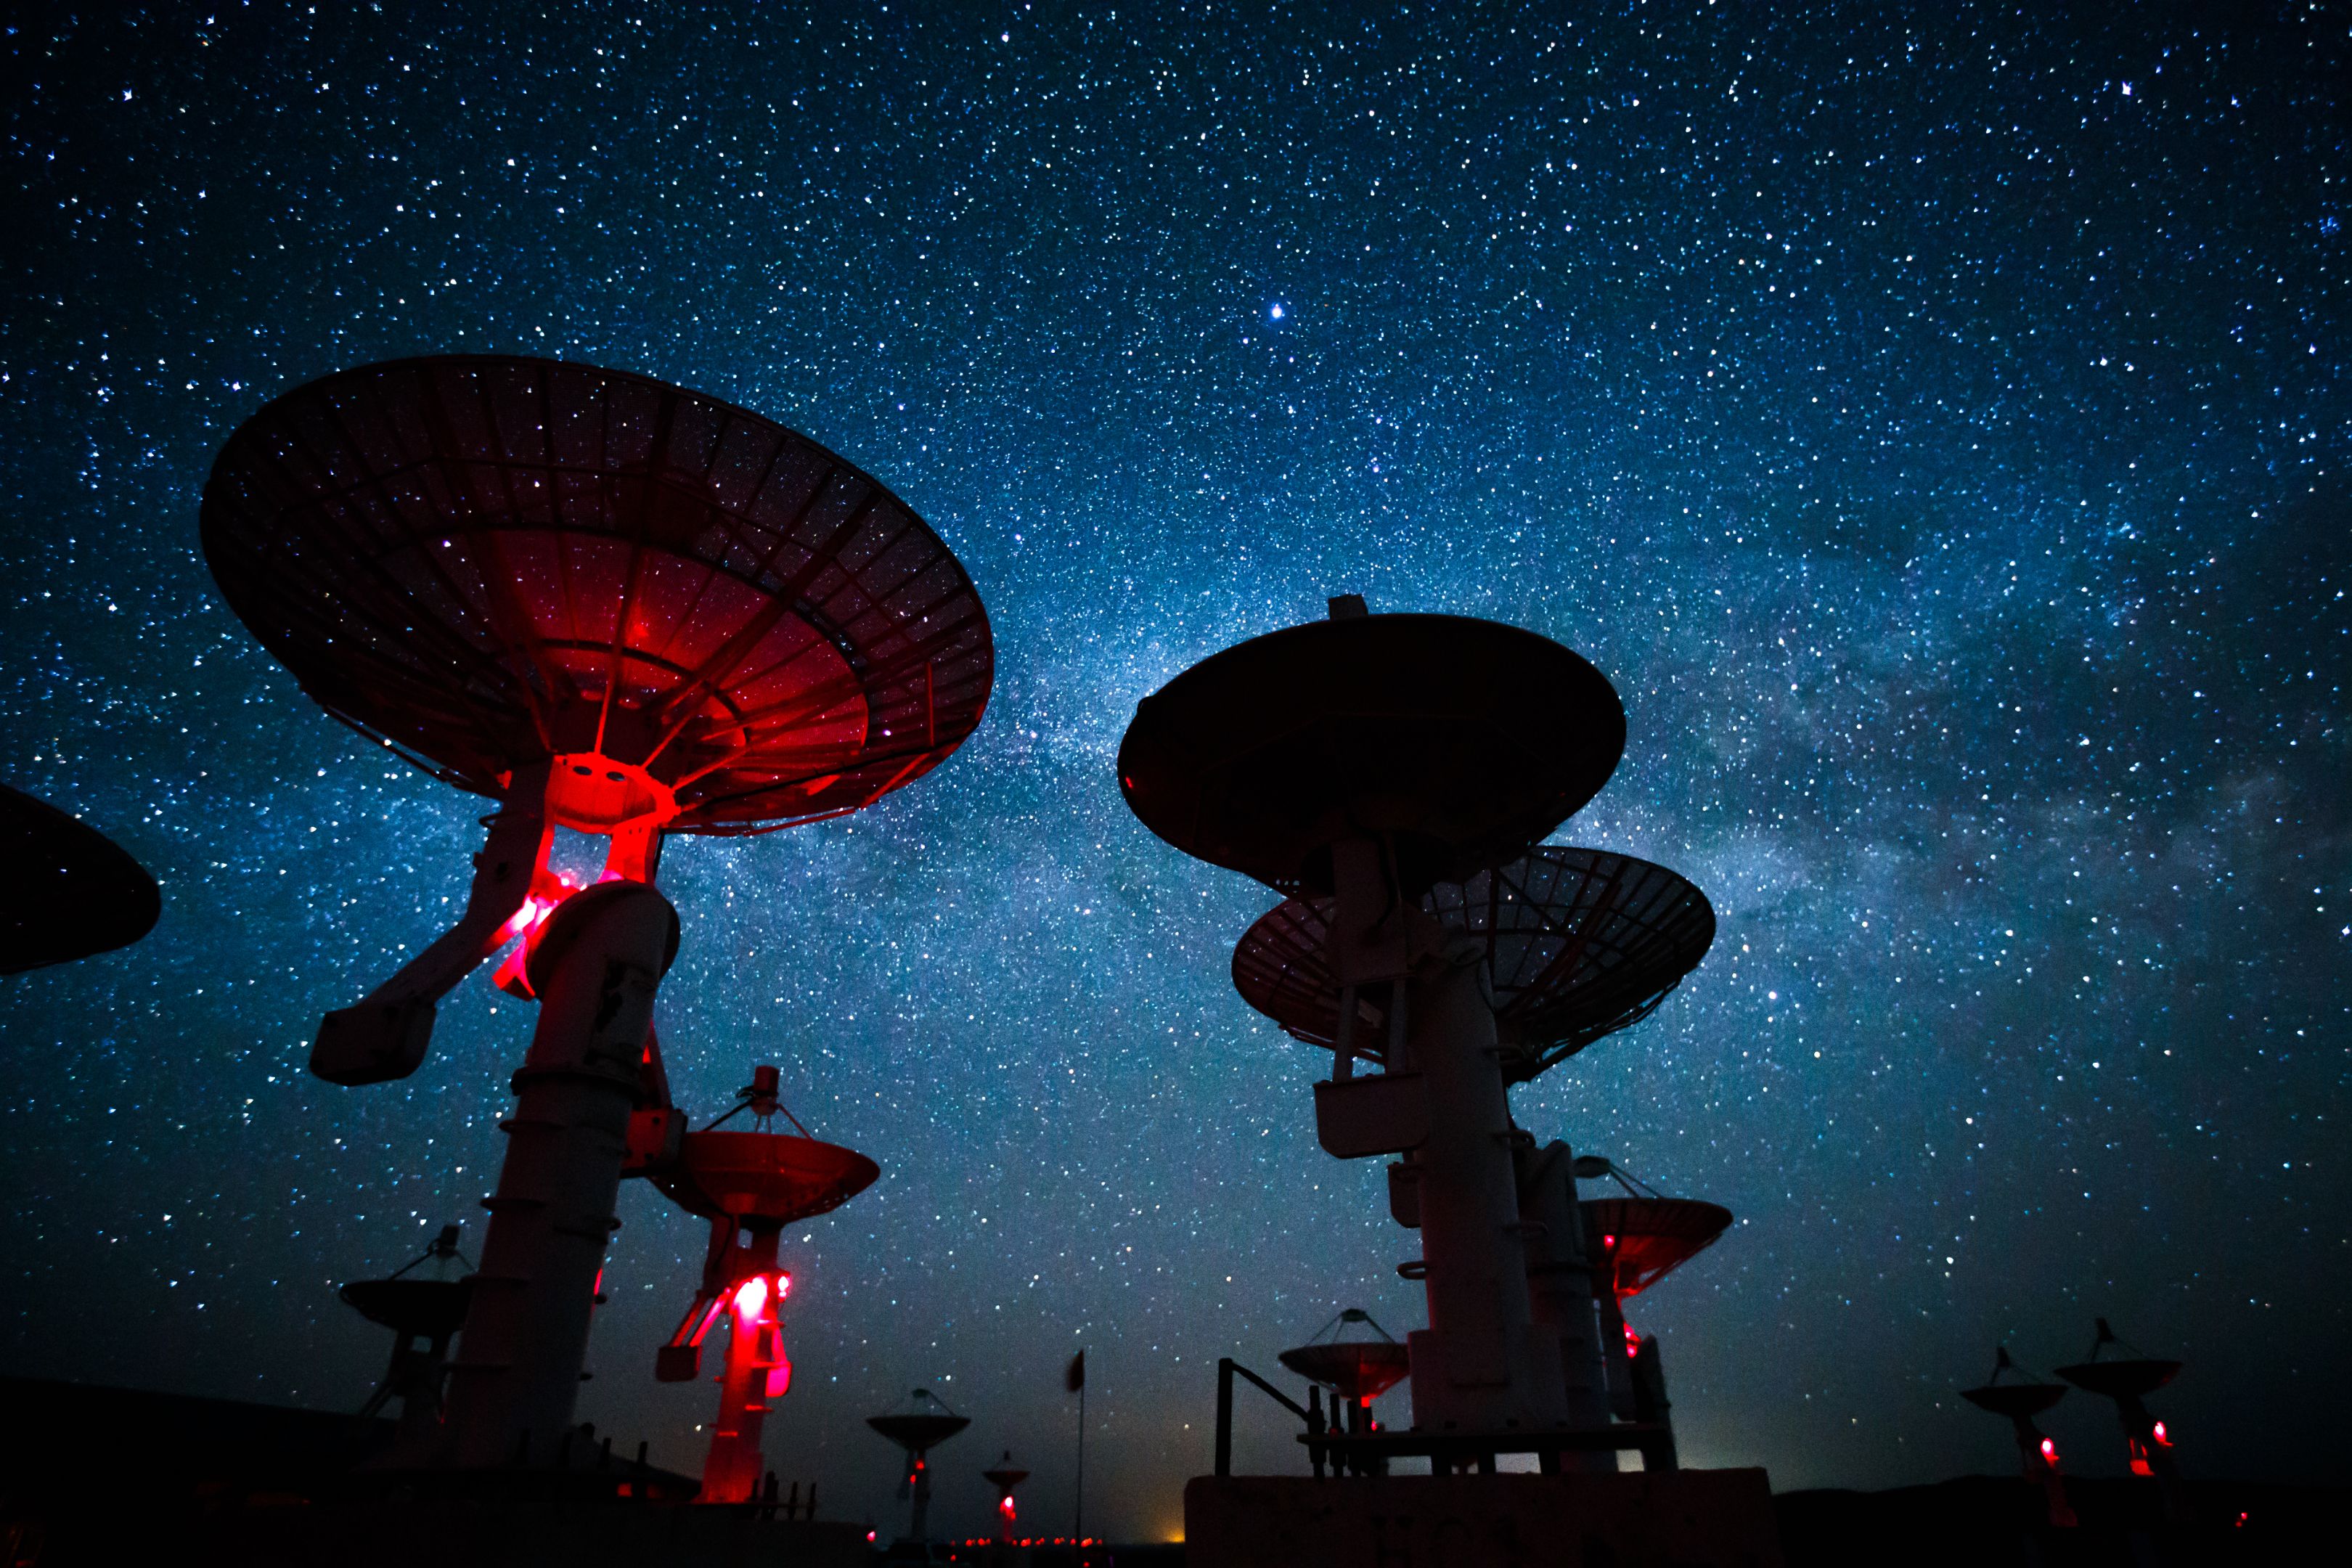 Milky Way galaxy over the satellite receiving station.